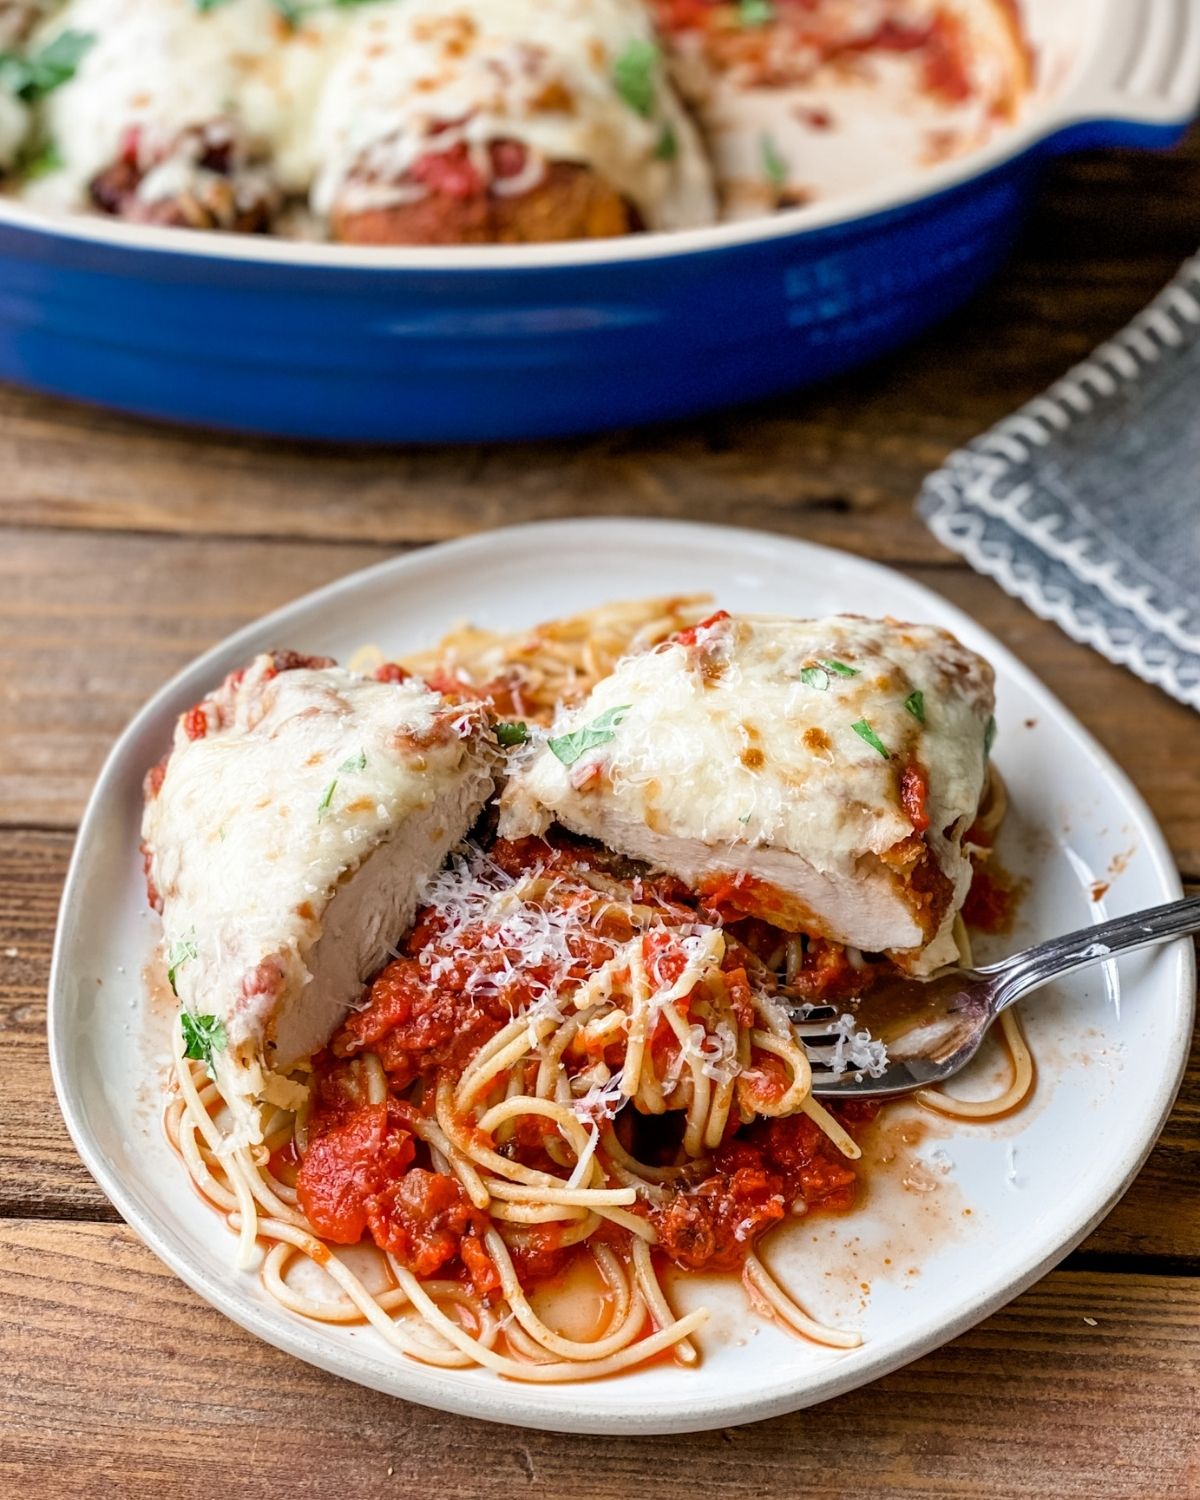 gluten-free chicken parm on a plate with pasta and sauce.